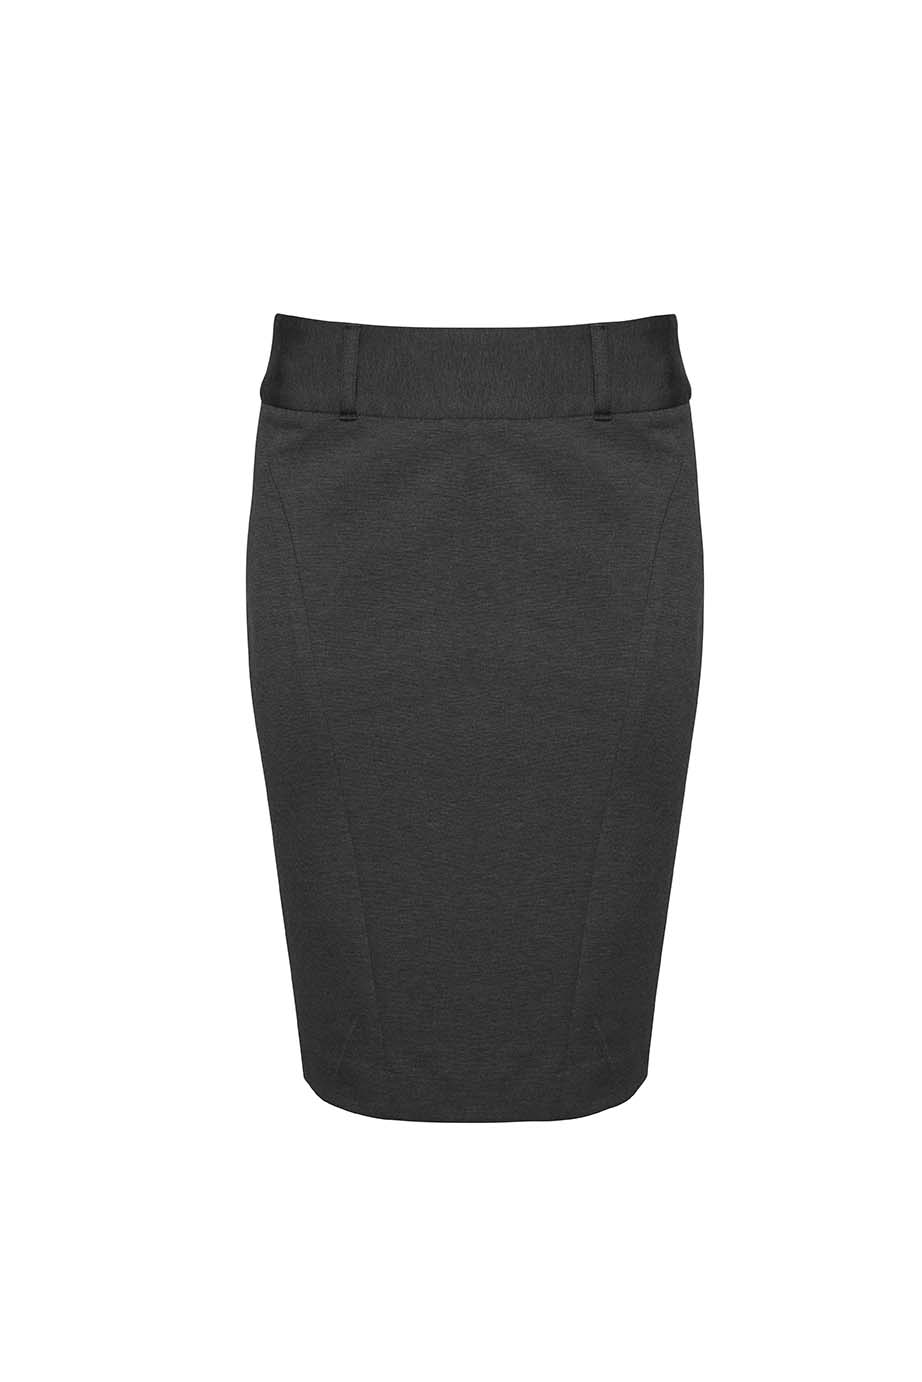 Ladies Skirt with Rear Split. 63% Polyester, 33% Viscose and 4% ...